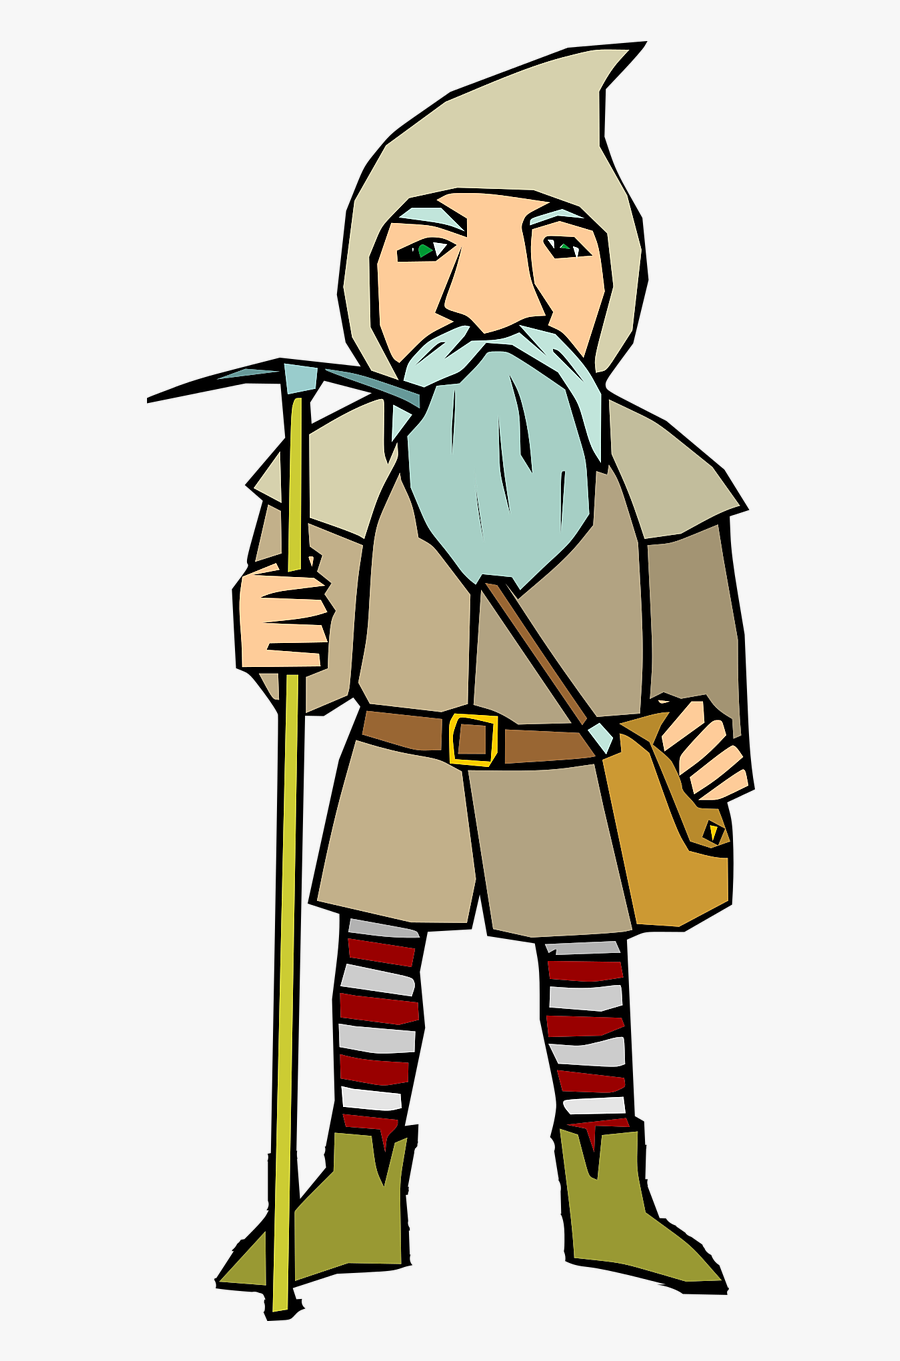 Gnome Fantasy Beard Free Picture - 600 Short Stories (serbian), Transparent Clipart